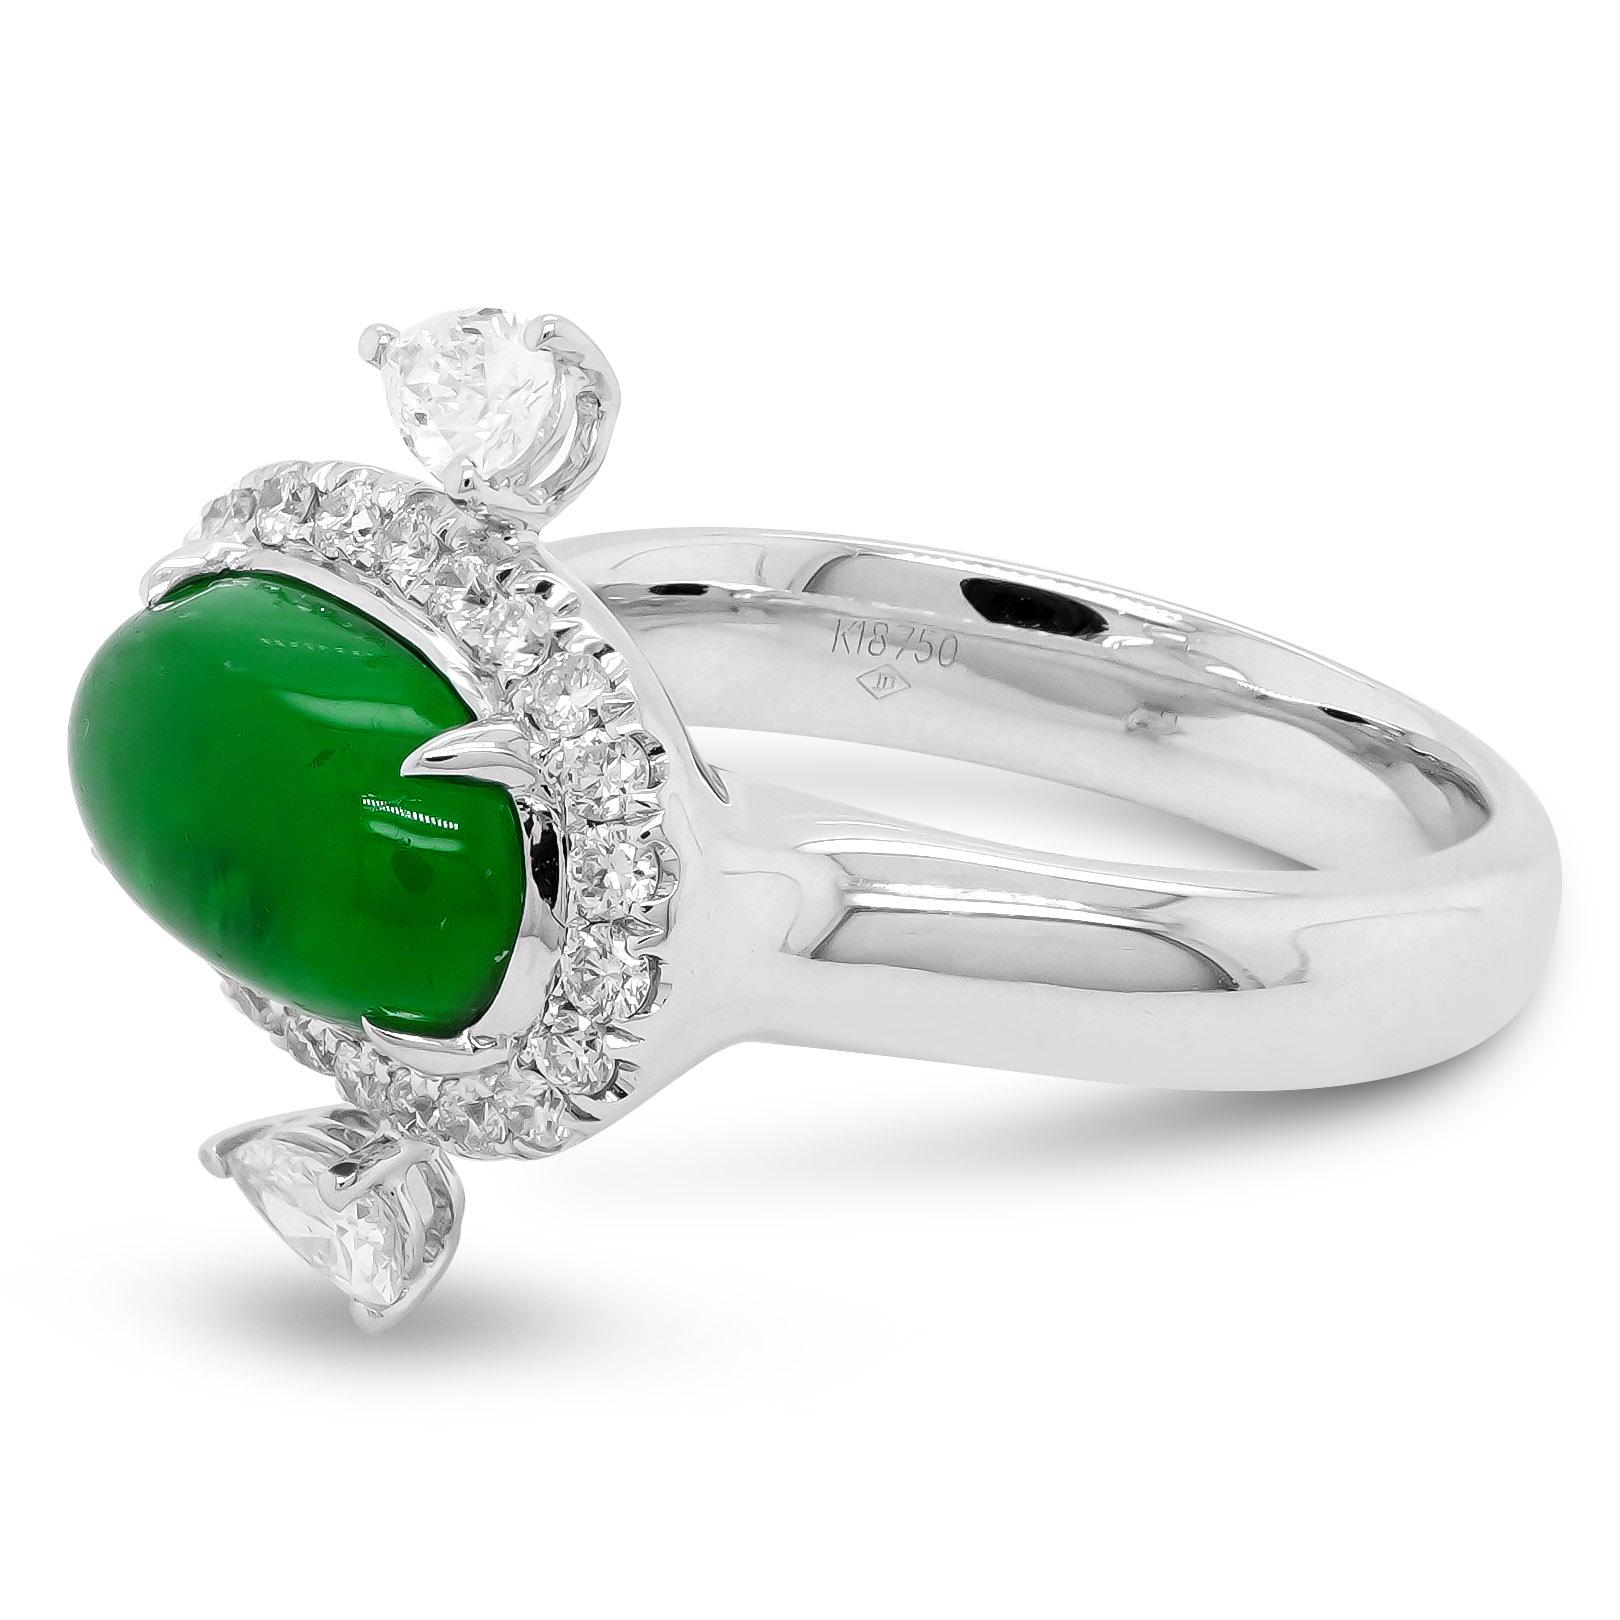 A beautiful Jade like Colombian emerald is set along with 0.58 carats of white diamond using 18k white gold. The ring is perfect for red carpet events. To find such translucent emerald cabochon is rare and the ring design does justice to the natural